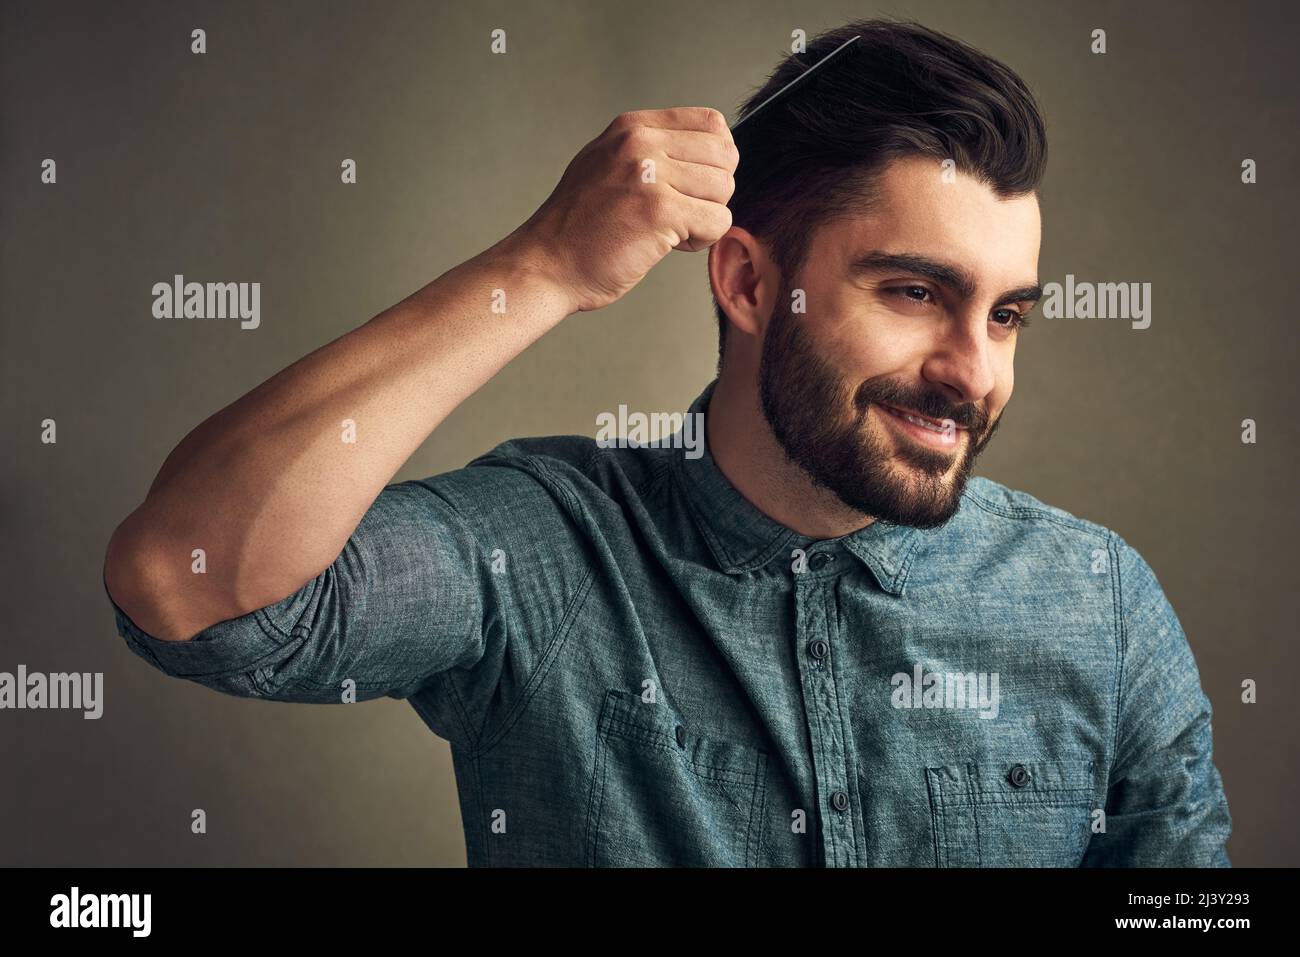 Have you ever seen anything so beautiful. Studio shot of a handsome young man combing his hair against a grey background. Stock Photo